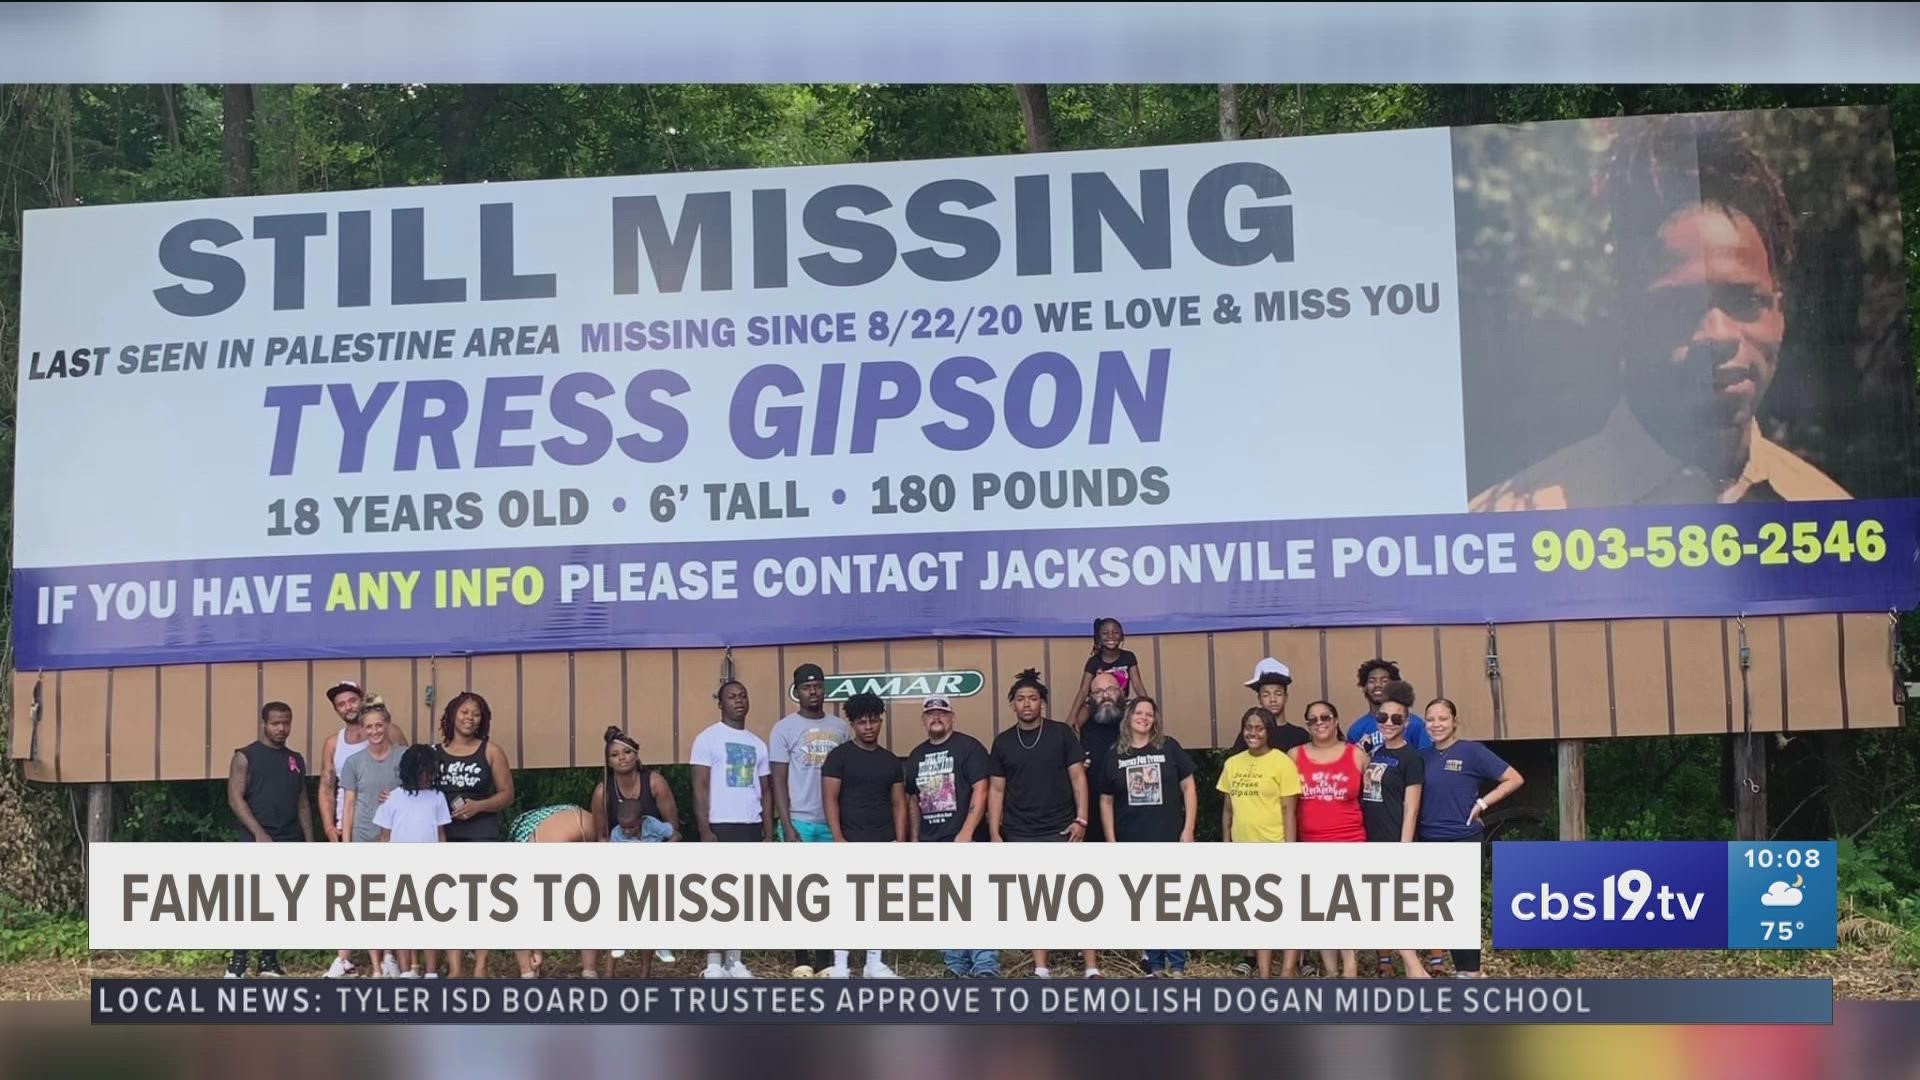 "Every day I wake up and it's like a nightmare I have to relive all over again," said LaVance Hill-Wooten, mother of missing teen.